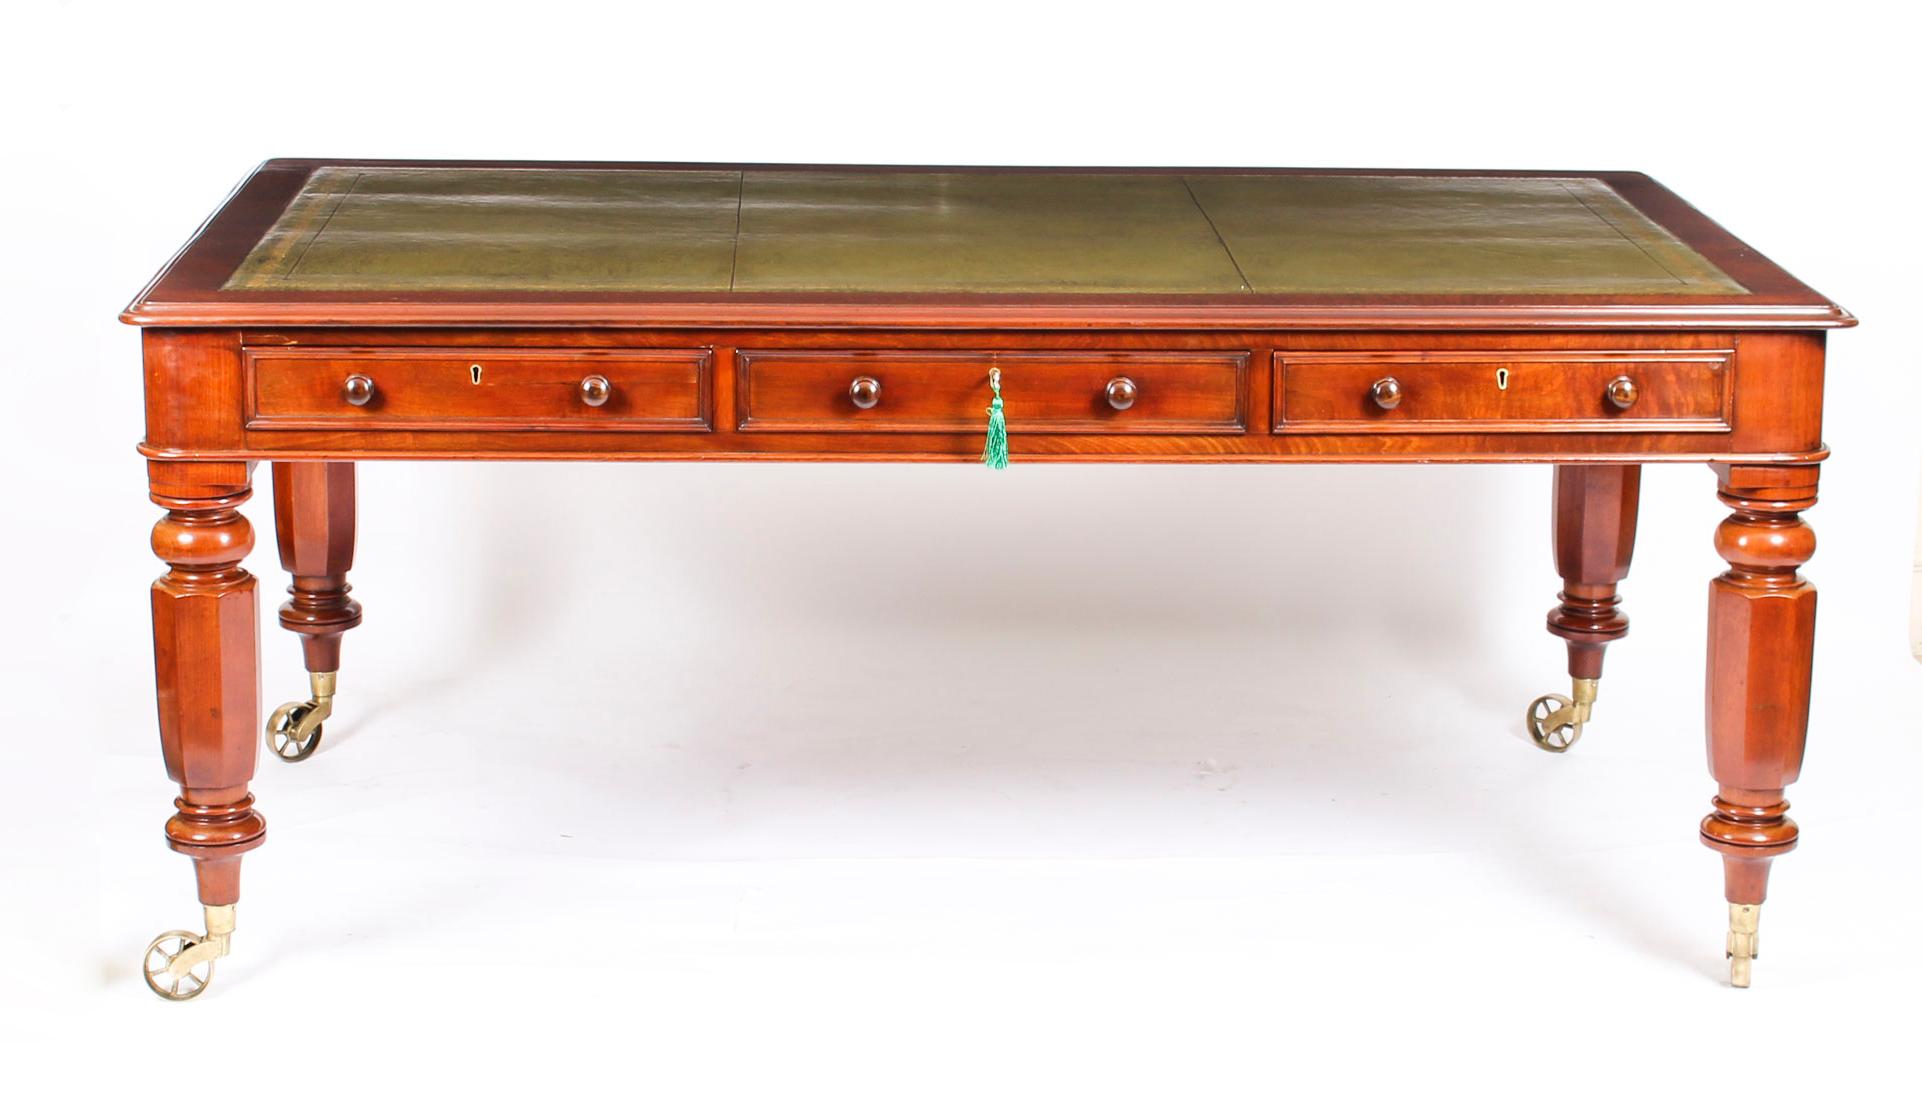 This is a gorgeous antique William IV mahogany partners library table, circa 1835 in date.

It is crafted from beautiful solid mahogany and features a striking faded green and goldtooled inset leather writing surface.

It is typical of the